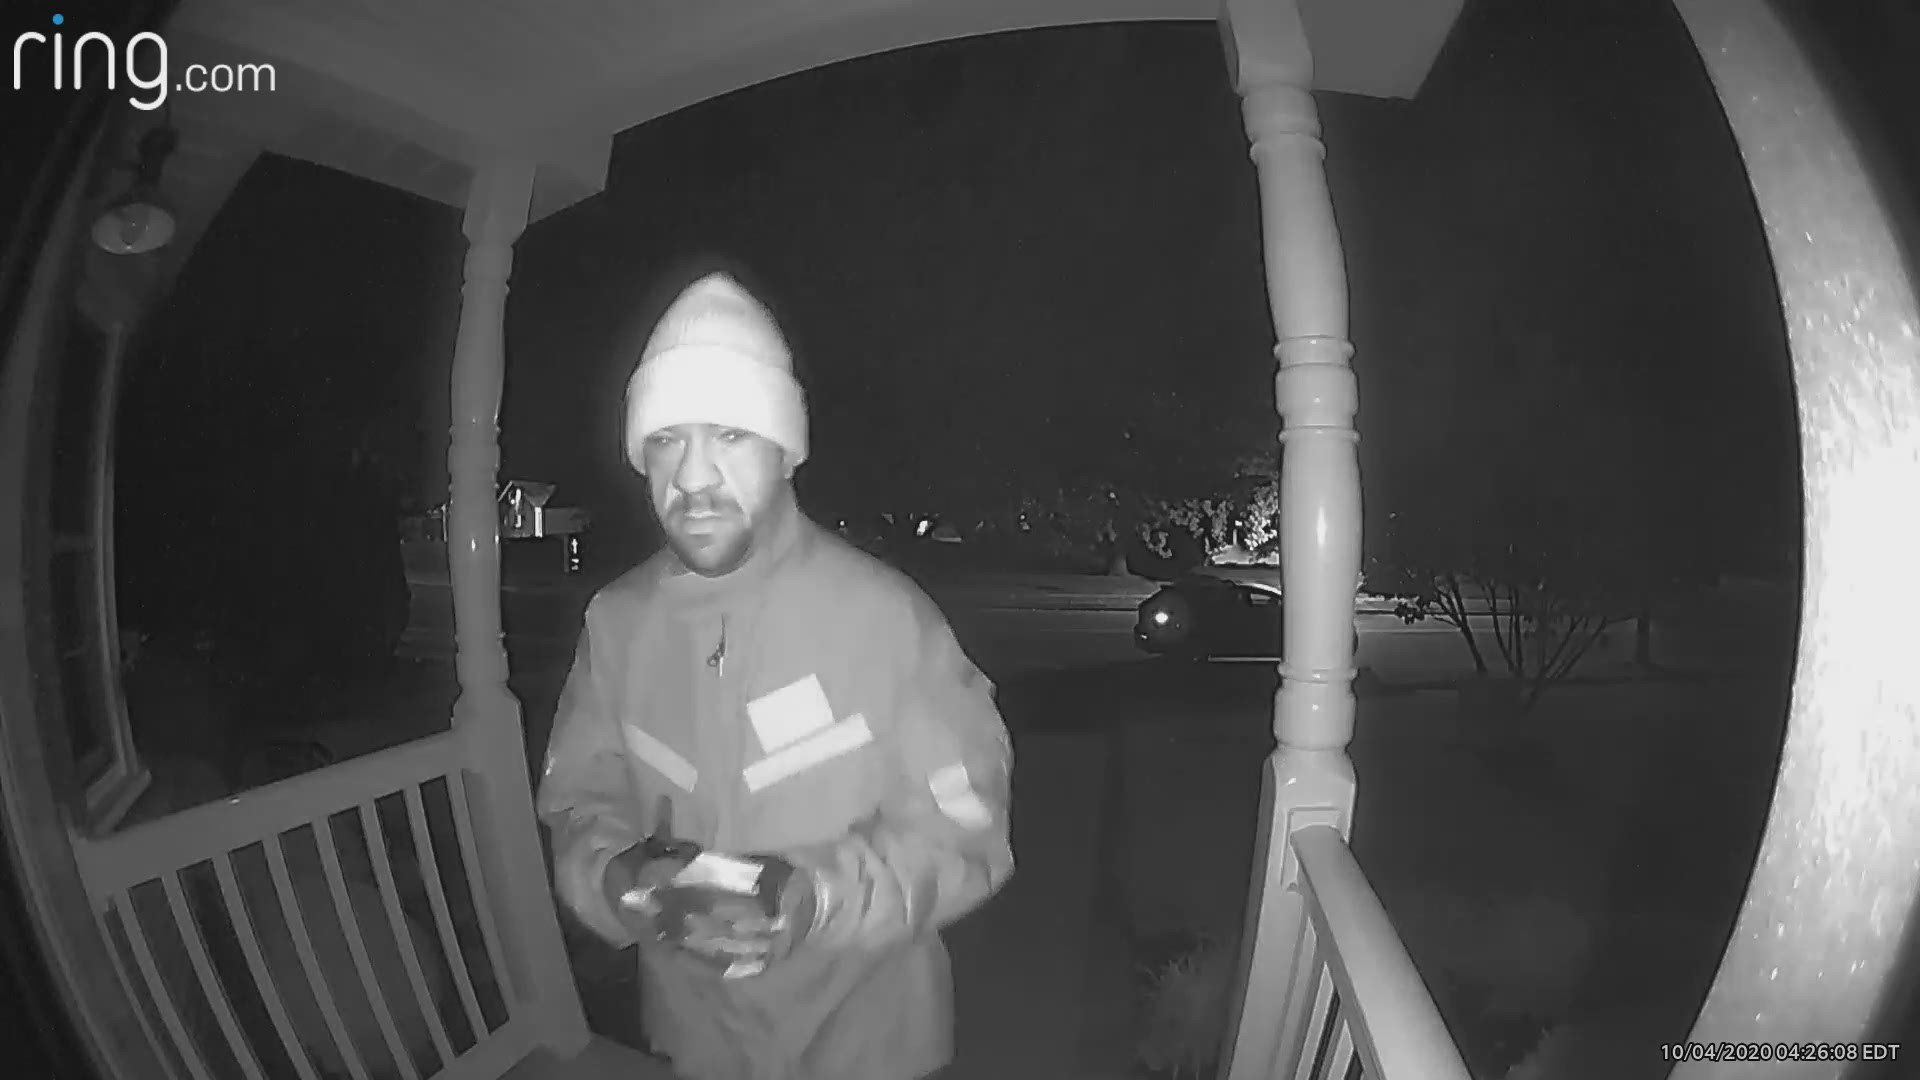 A Ring door camera captured the person who dropped the letter in front of the home, according to the affidavit.